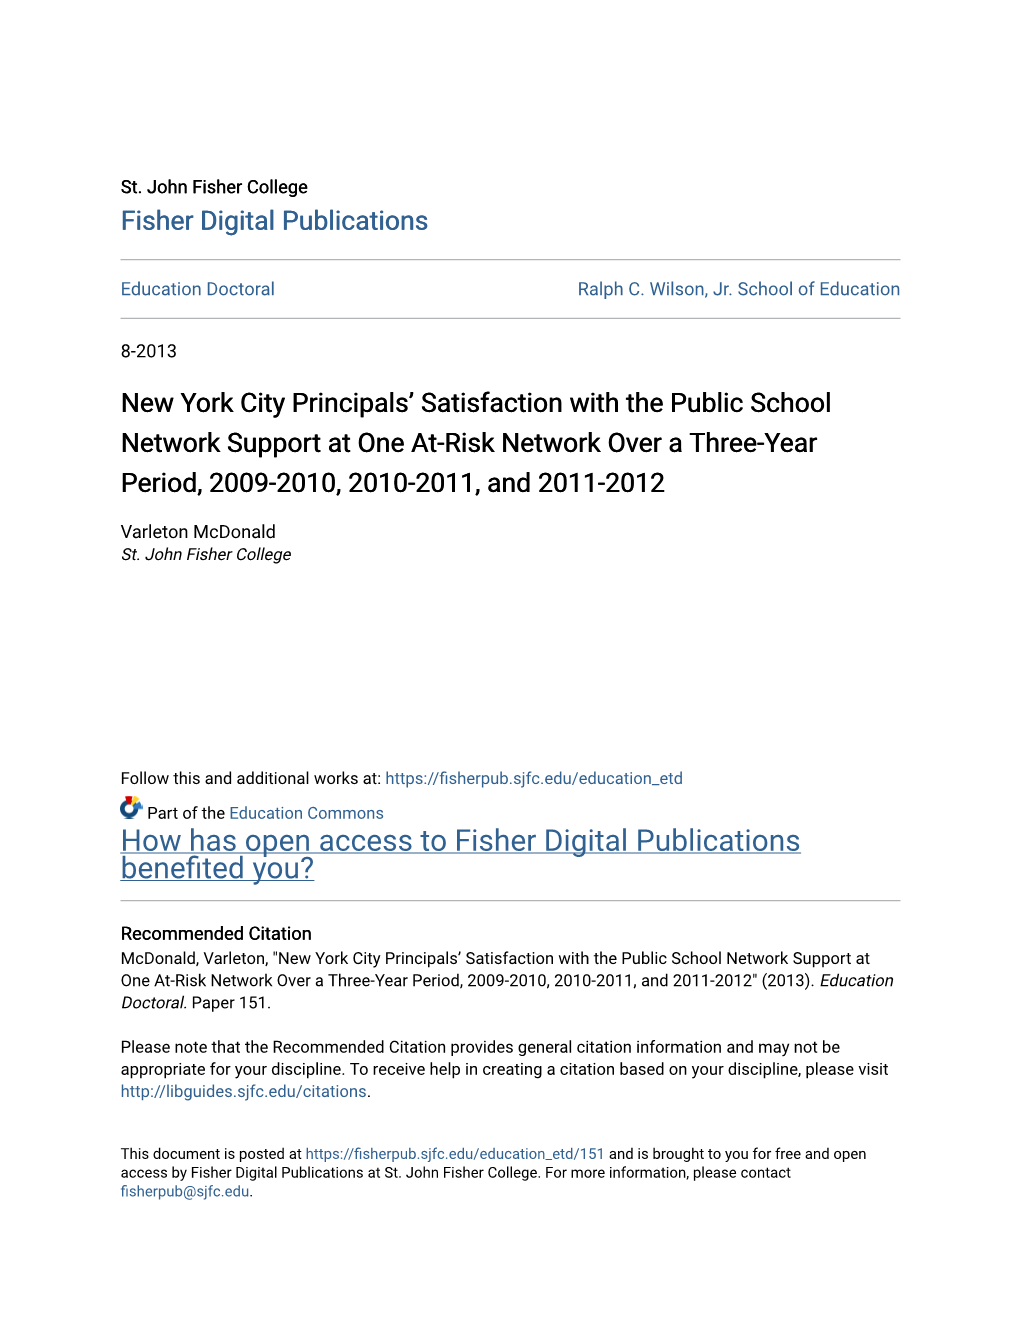 New York City Principals' Satisfaction with the Public School Network